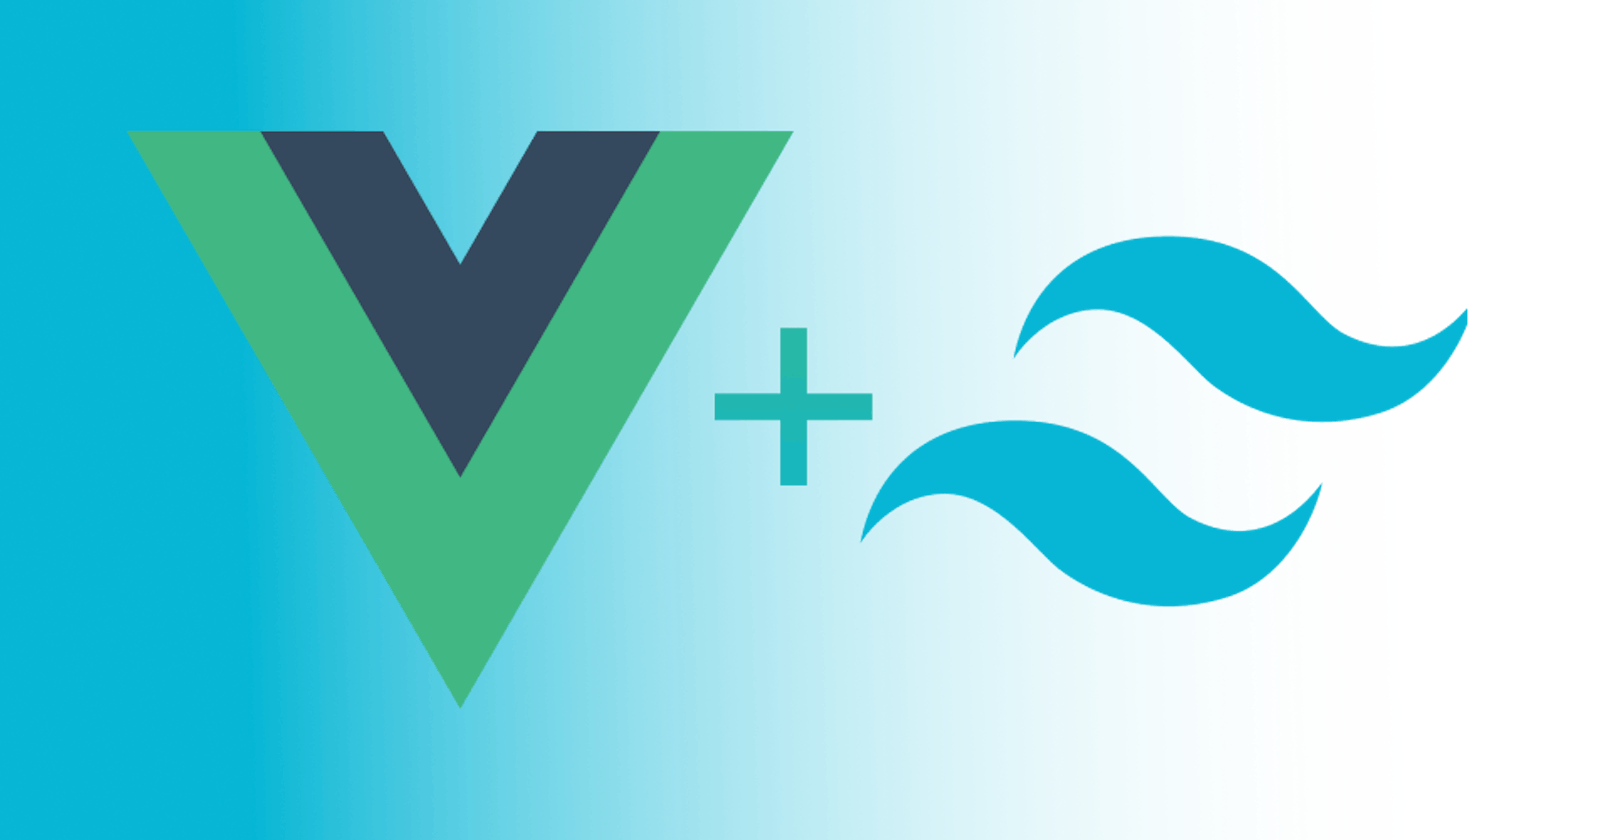 How to Configure your Vue 3 app to use Tailwind CSS